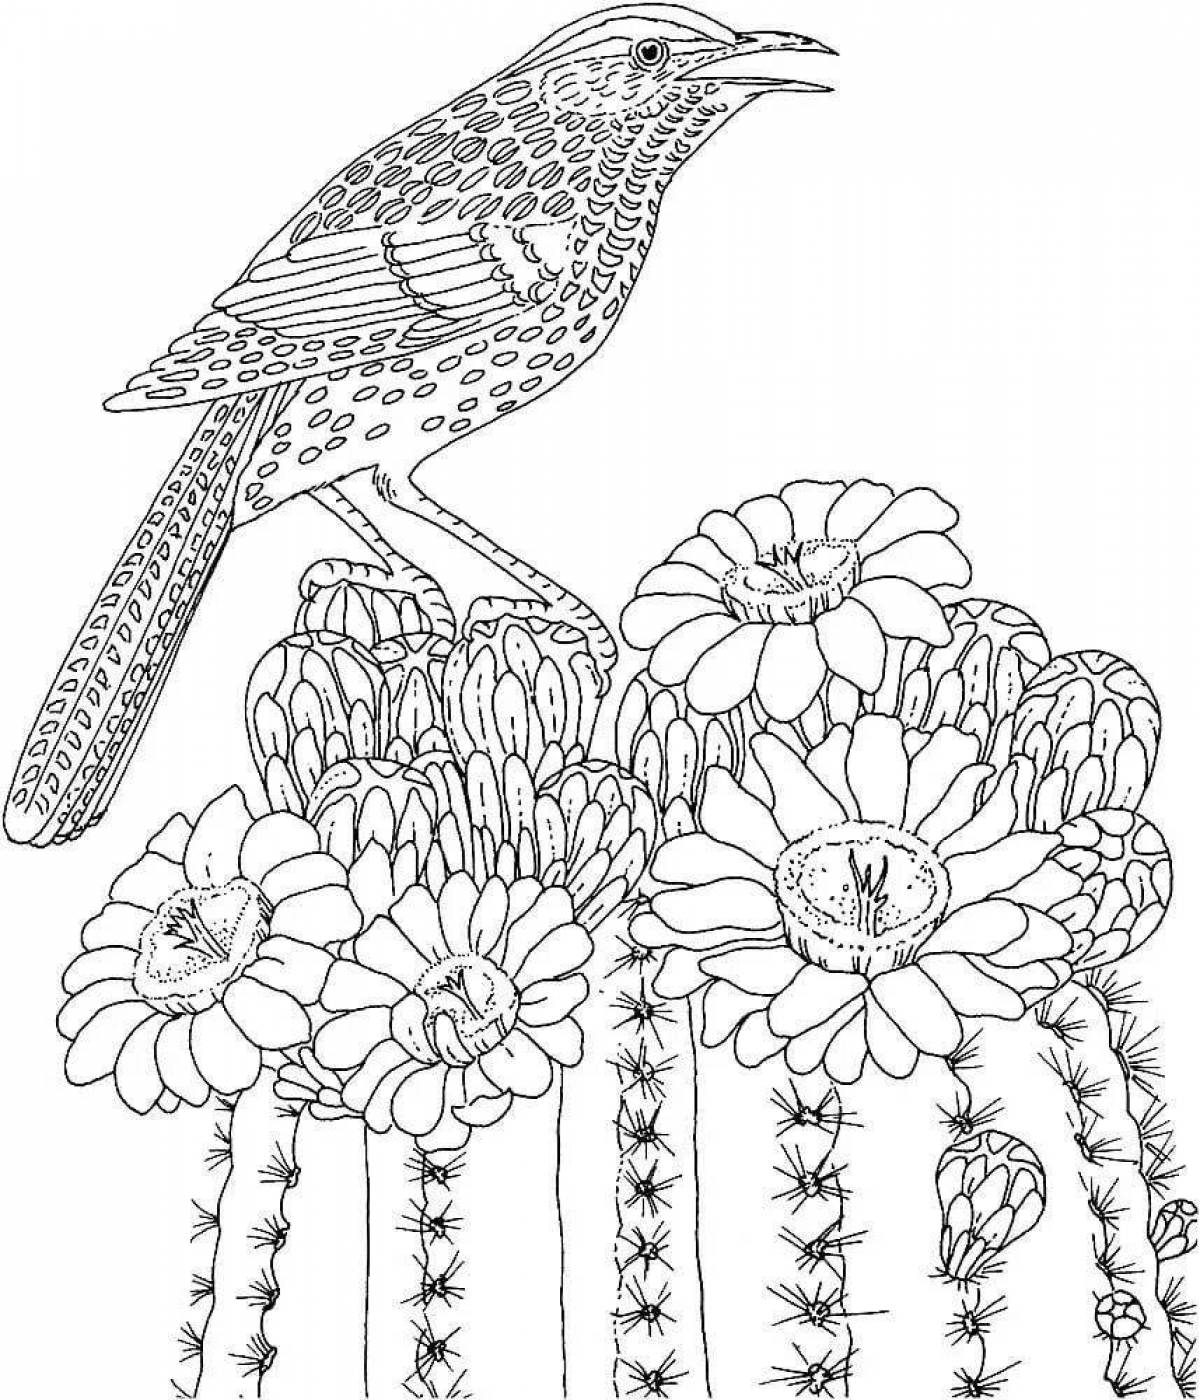 Detailed coloring page of compound colors